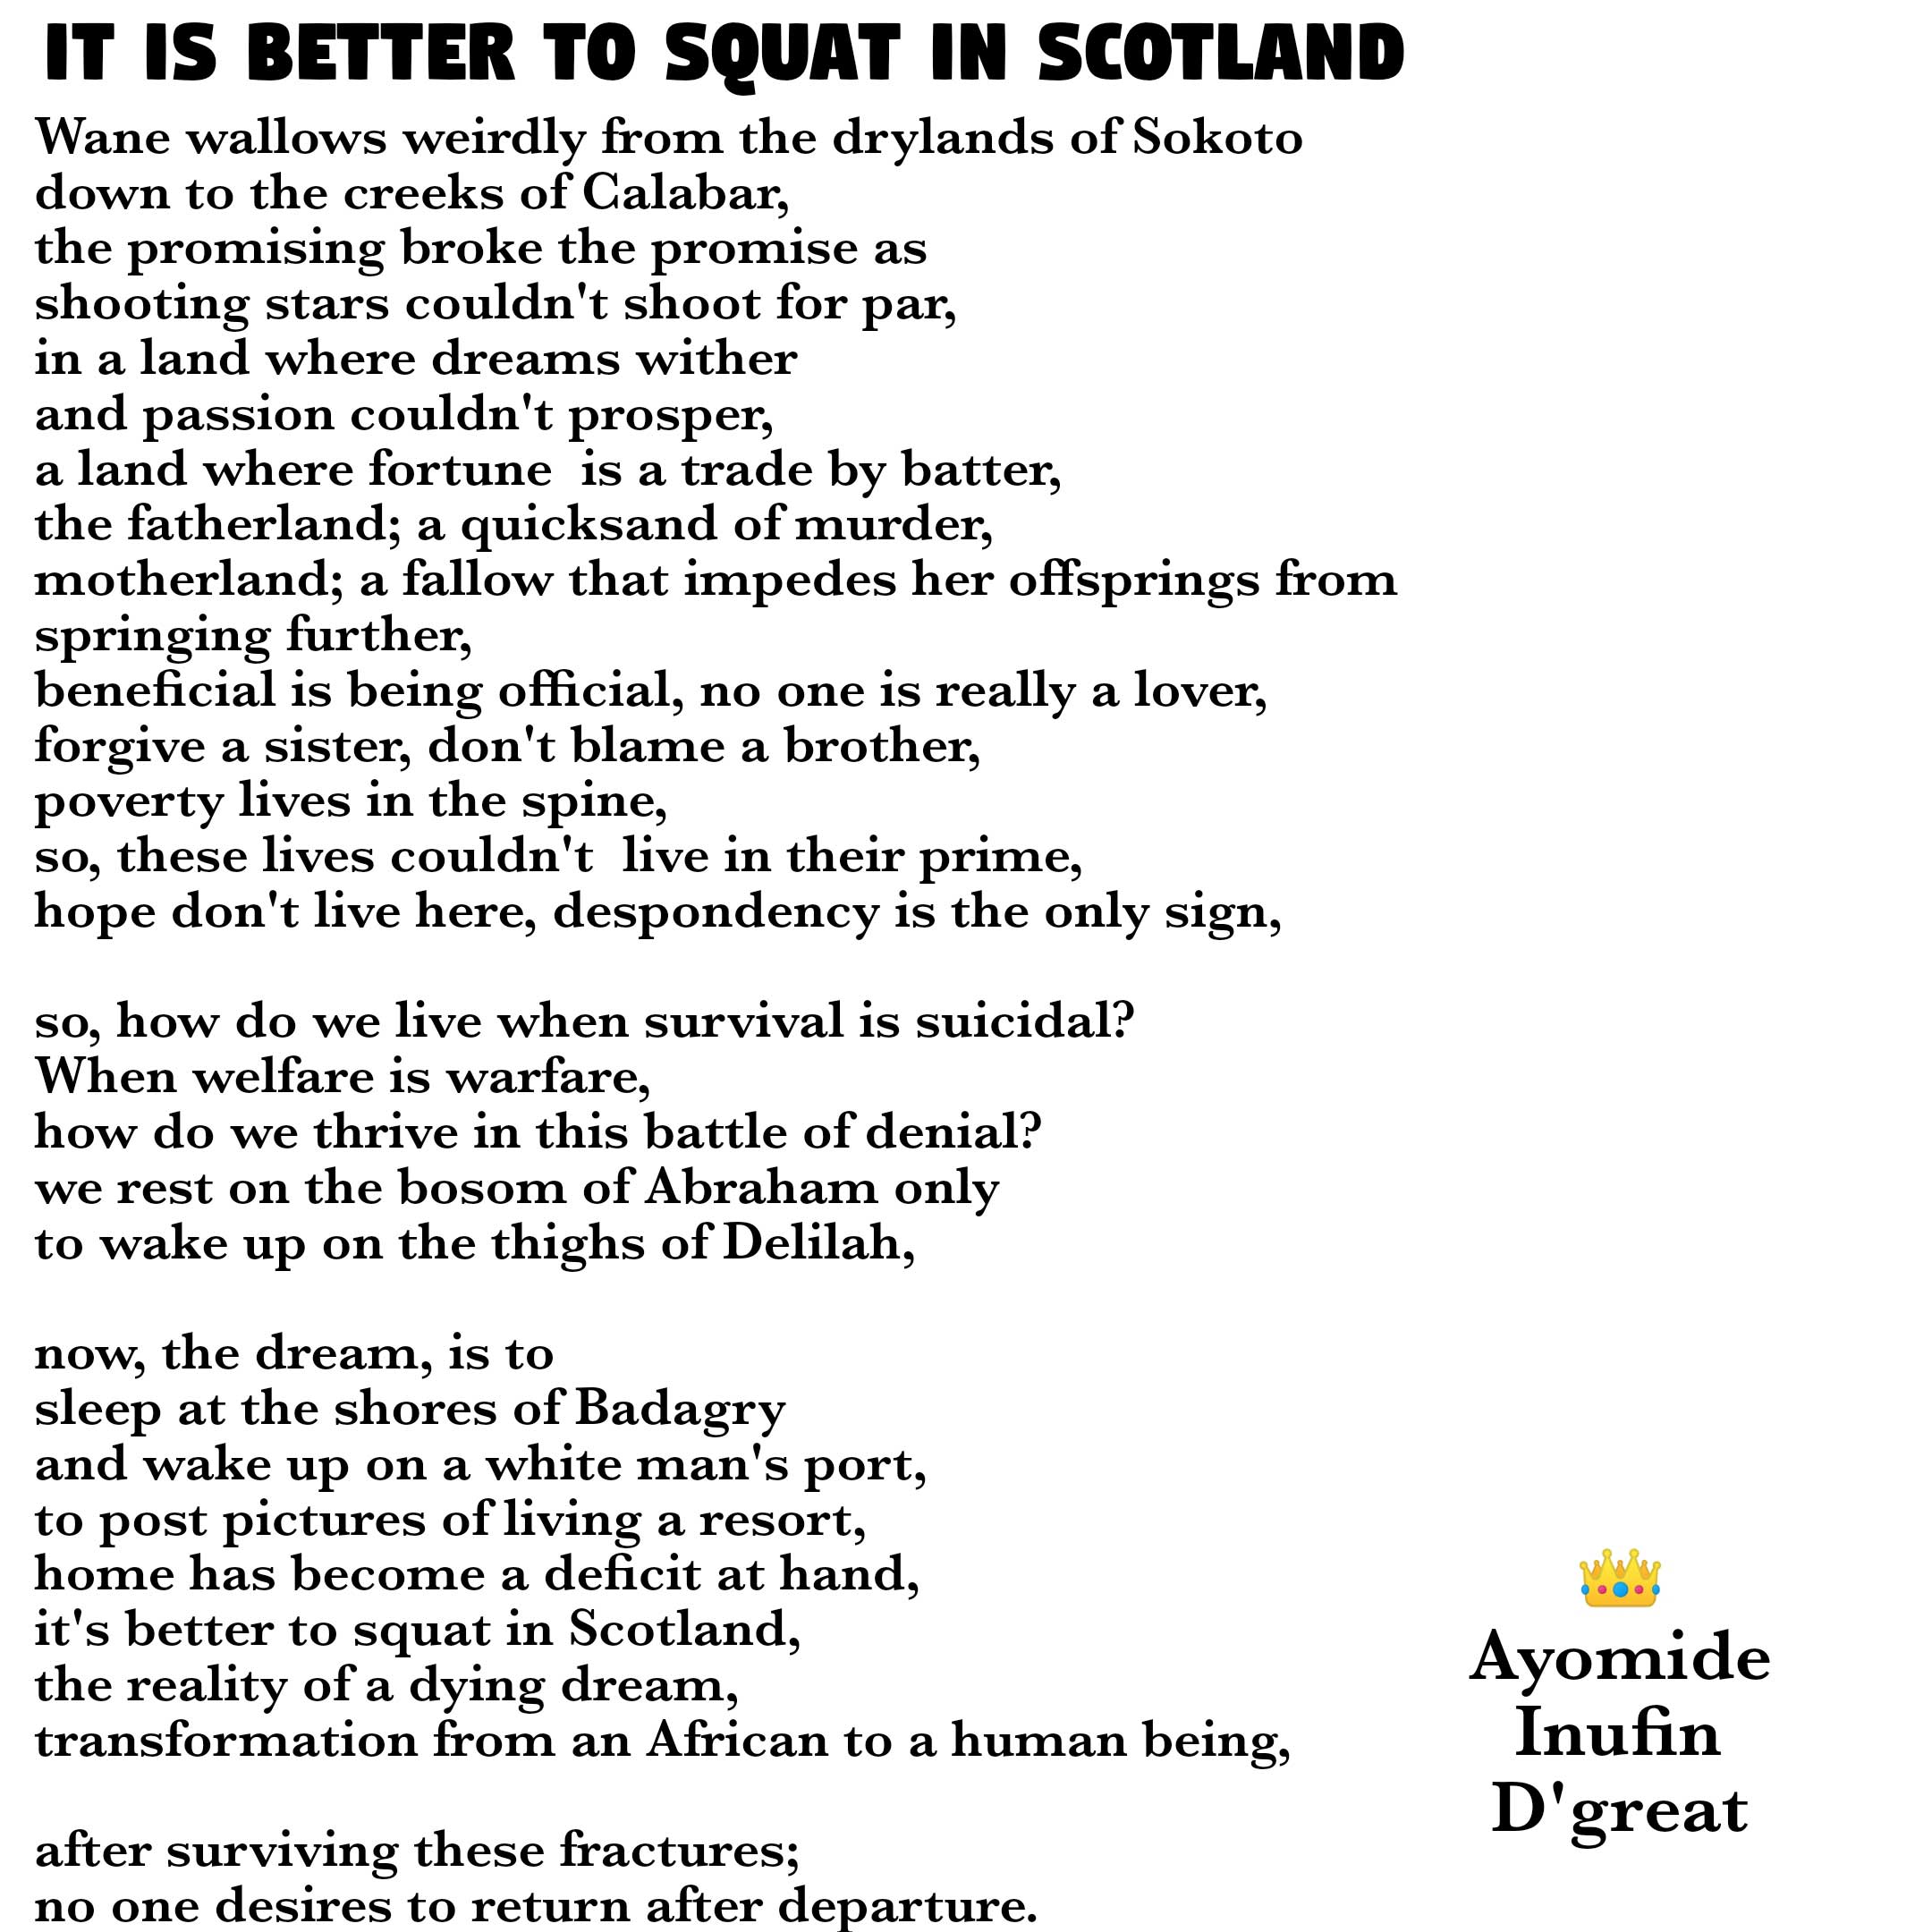 IT'S BETTER TO SQUAT IN SCOTLAND - Ayomide Inufin D'great